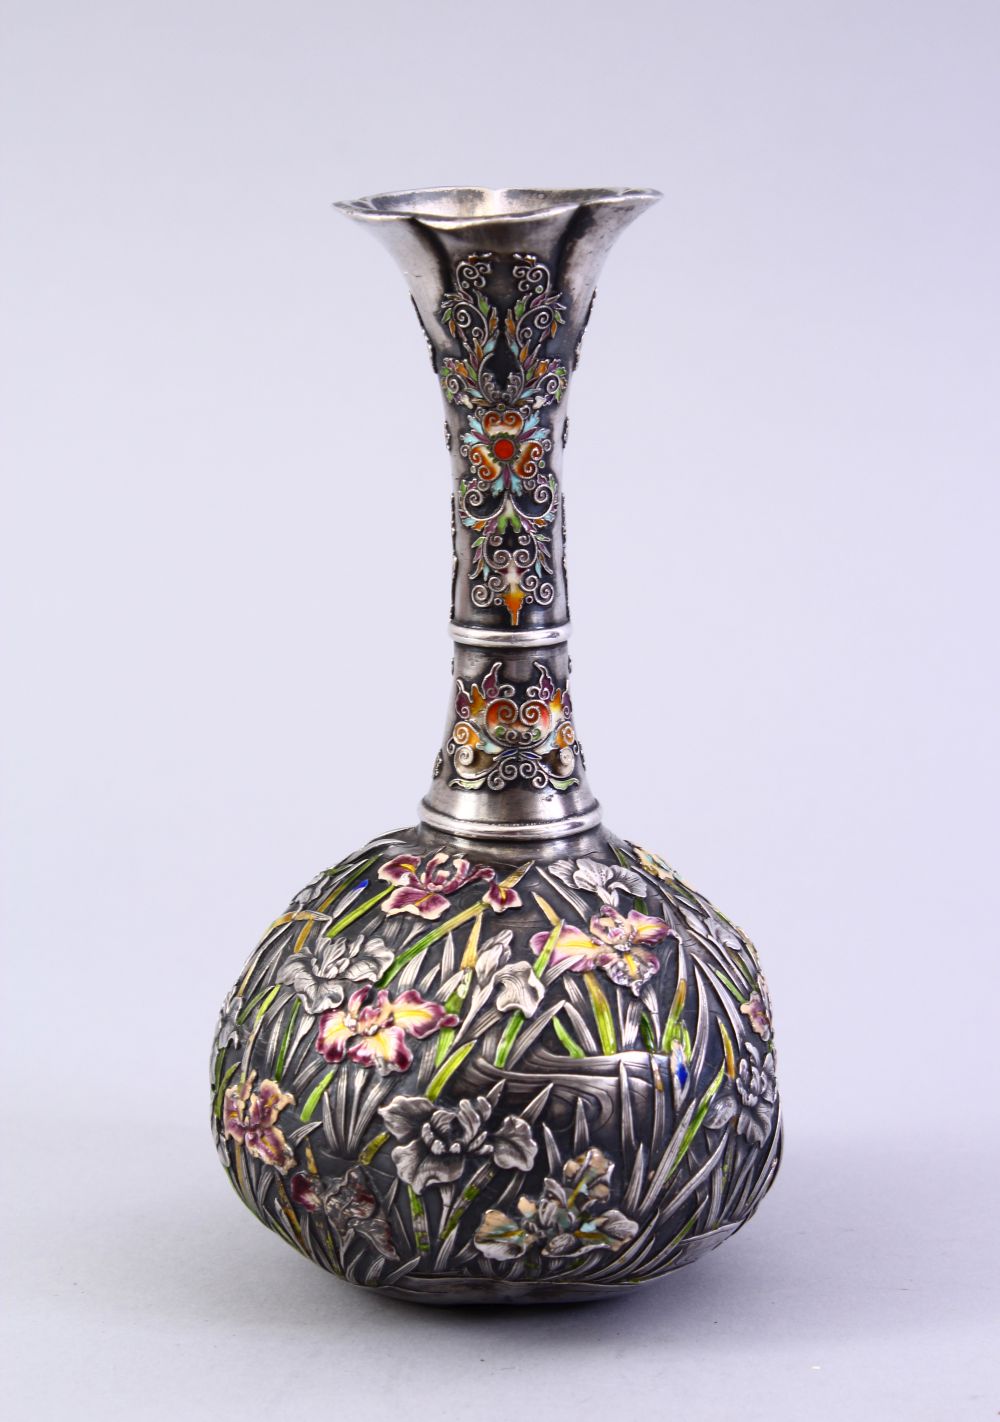 A GOOD JAPANESE MEIJI PERIOD SILVER & ENAMEL BOTTLE VASE, the vase with iris and other floral